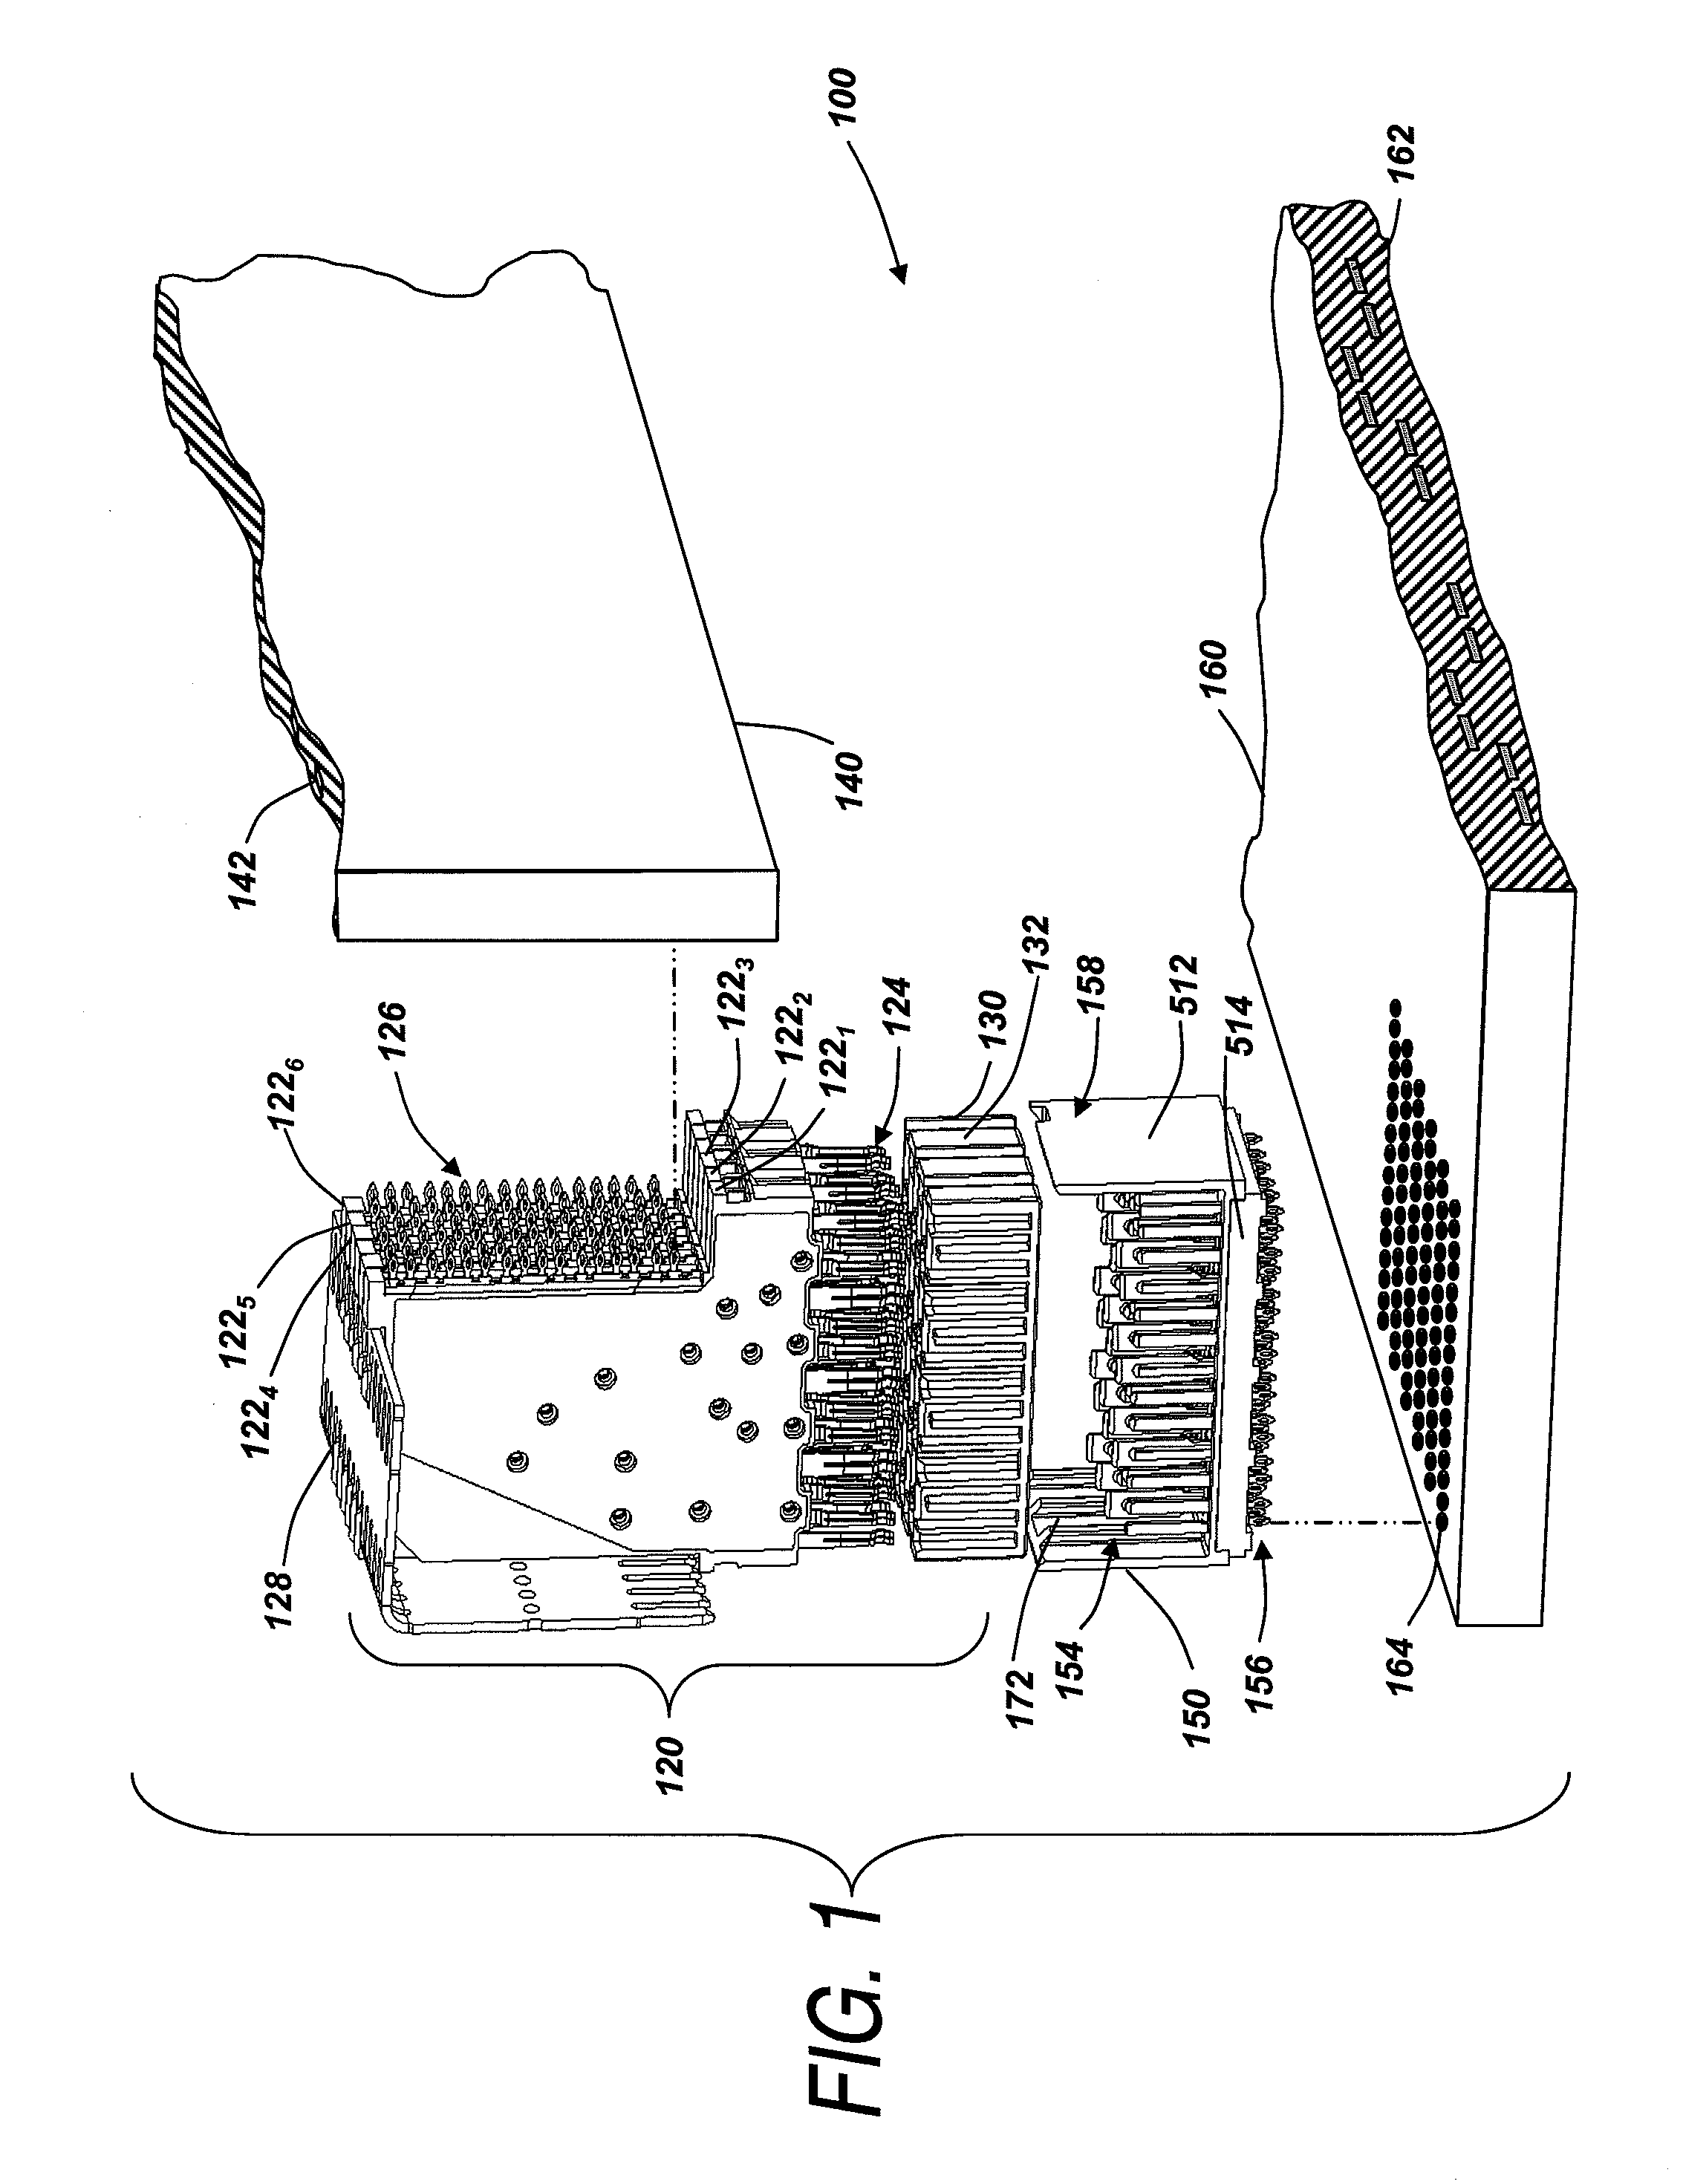 Differential electrical connector with improved skew control